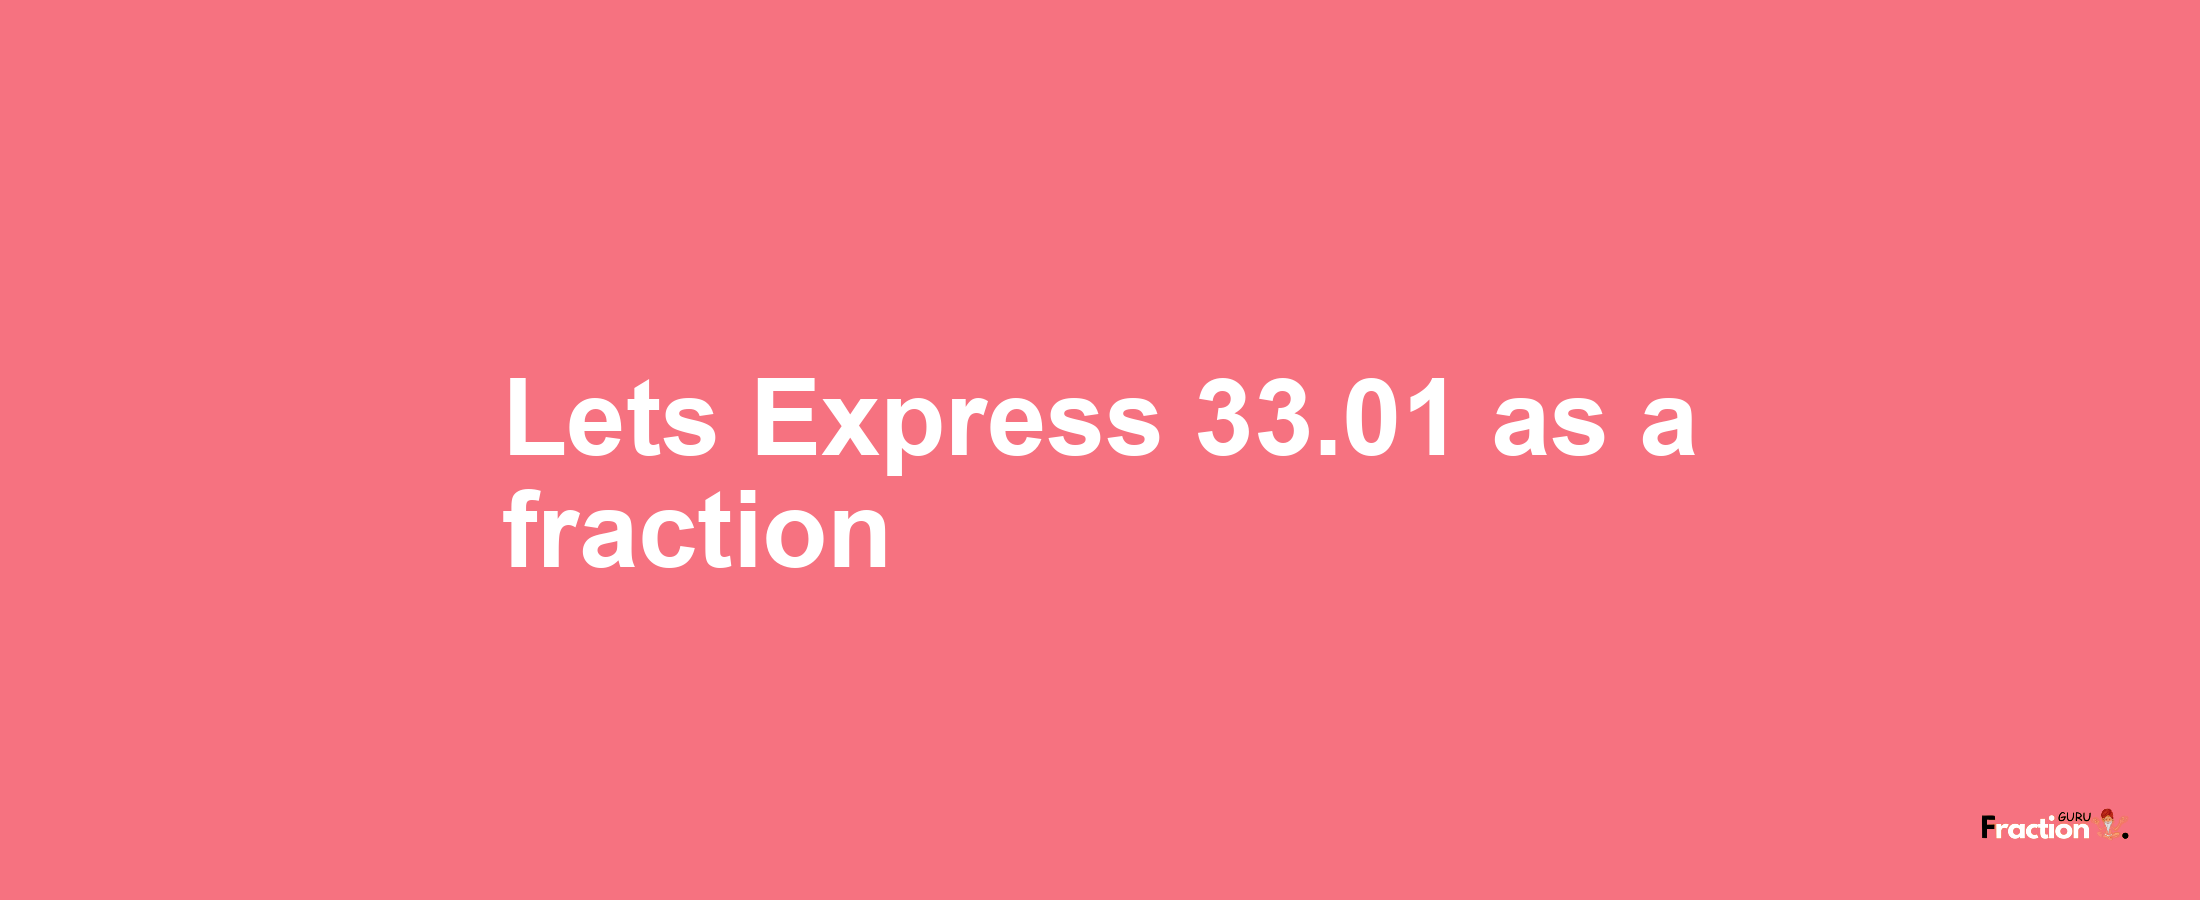 Lets Express 33.01 as afraction